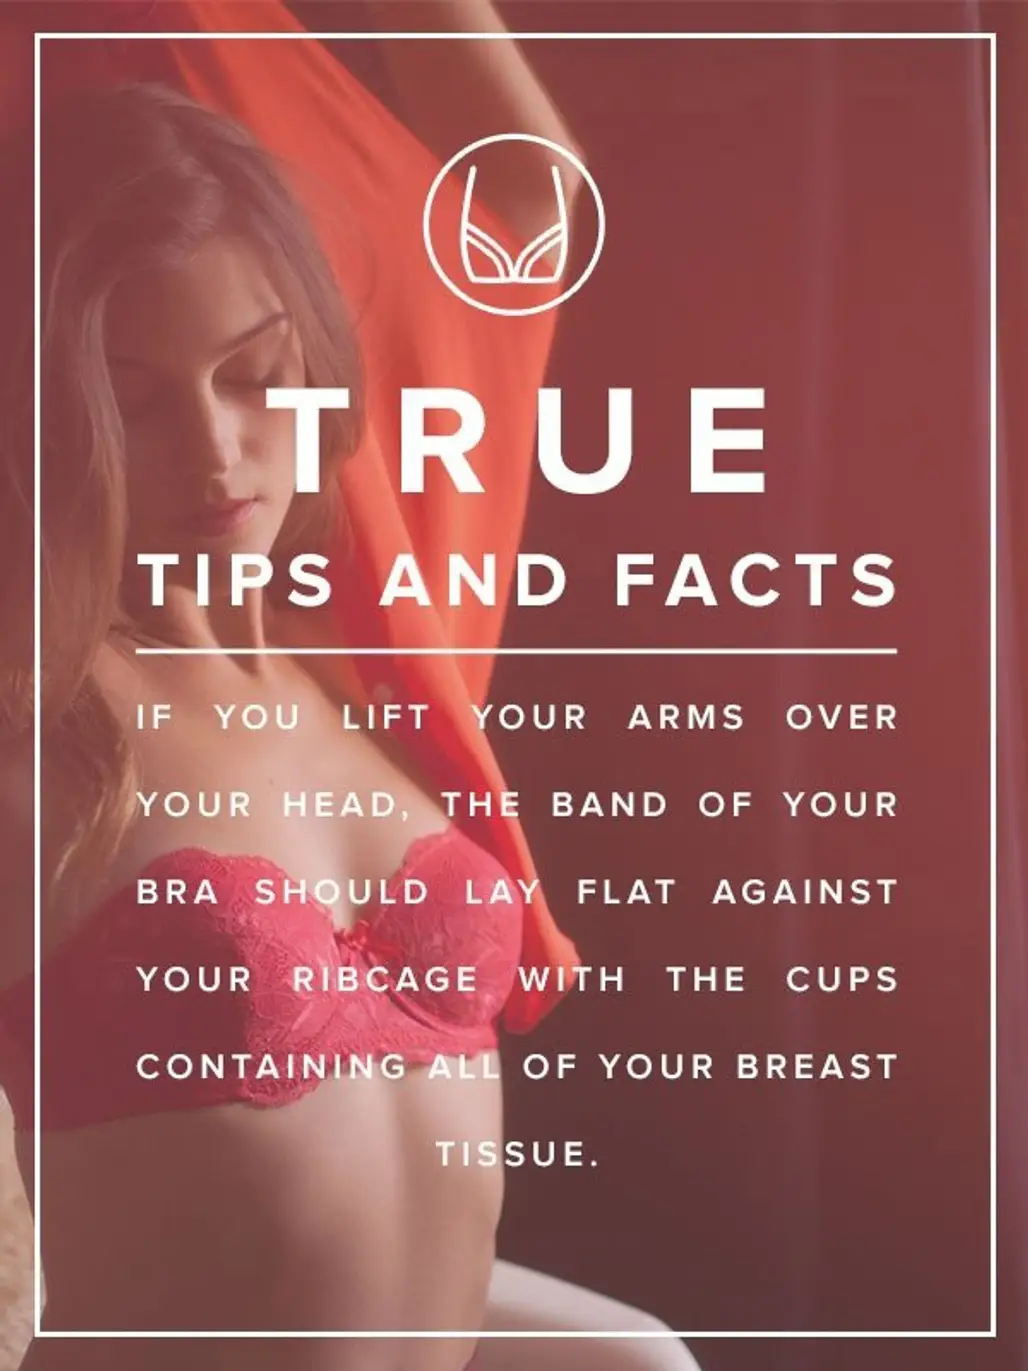 How to Tell if You're Wearing the Right Size Bra